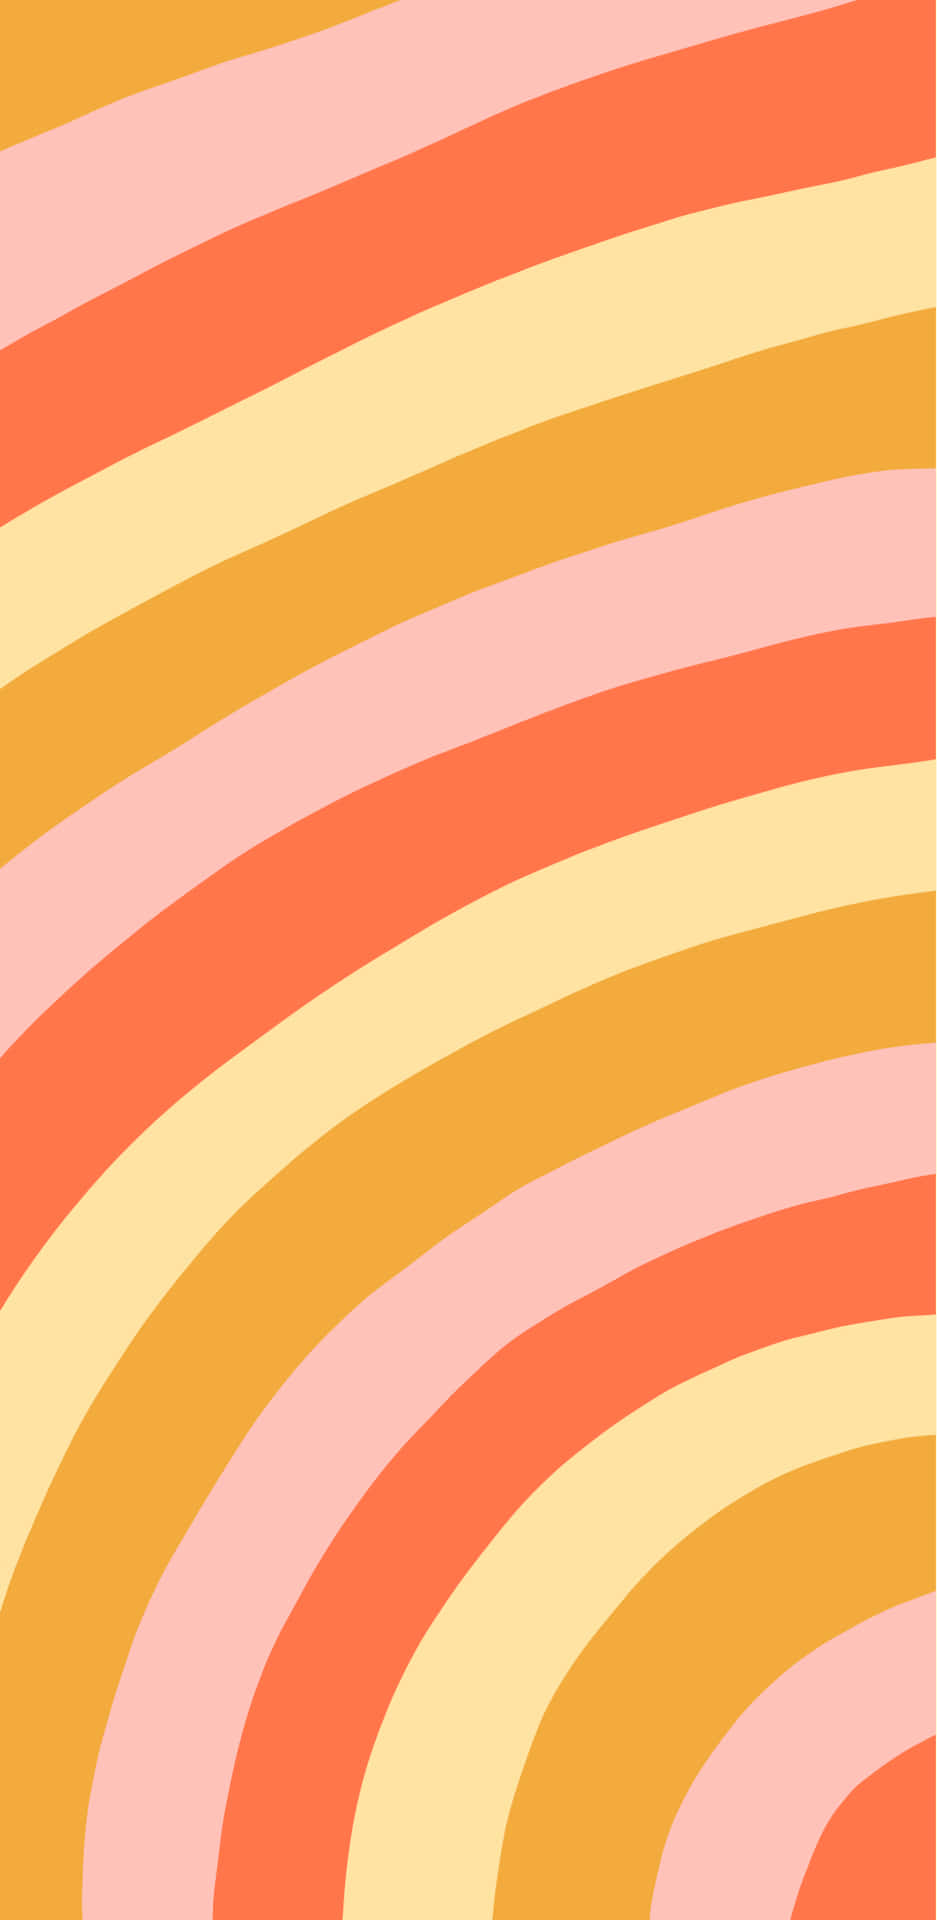 Download A Pink And Orange Striped Wallpaper Wallpaper 